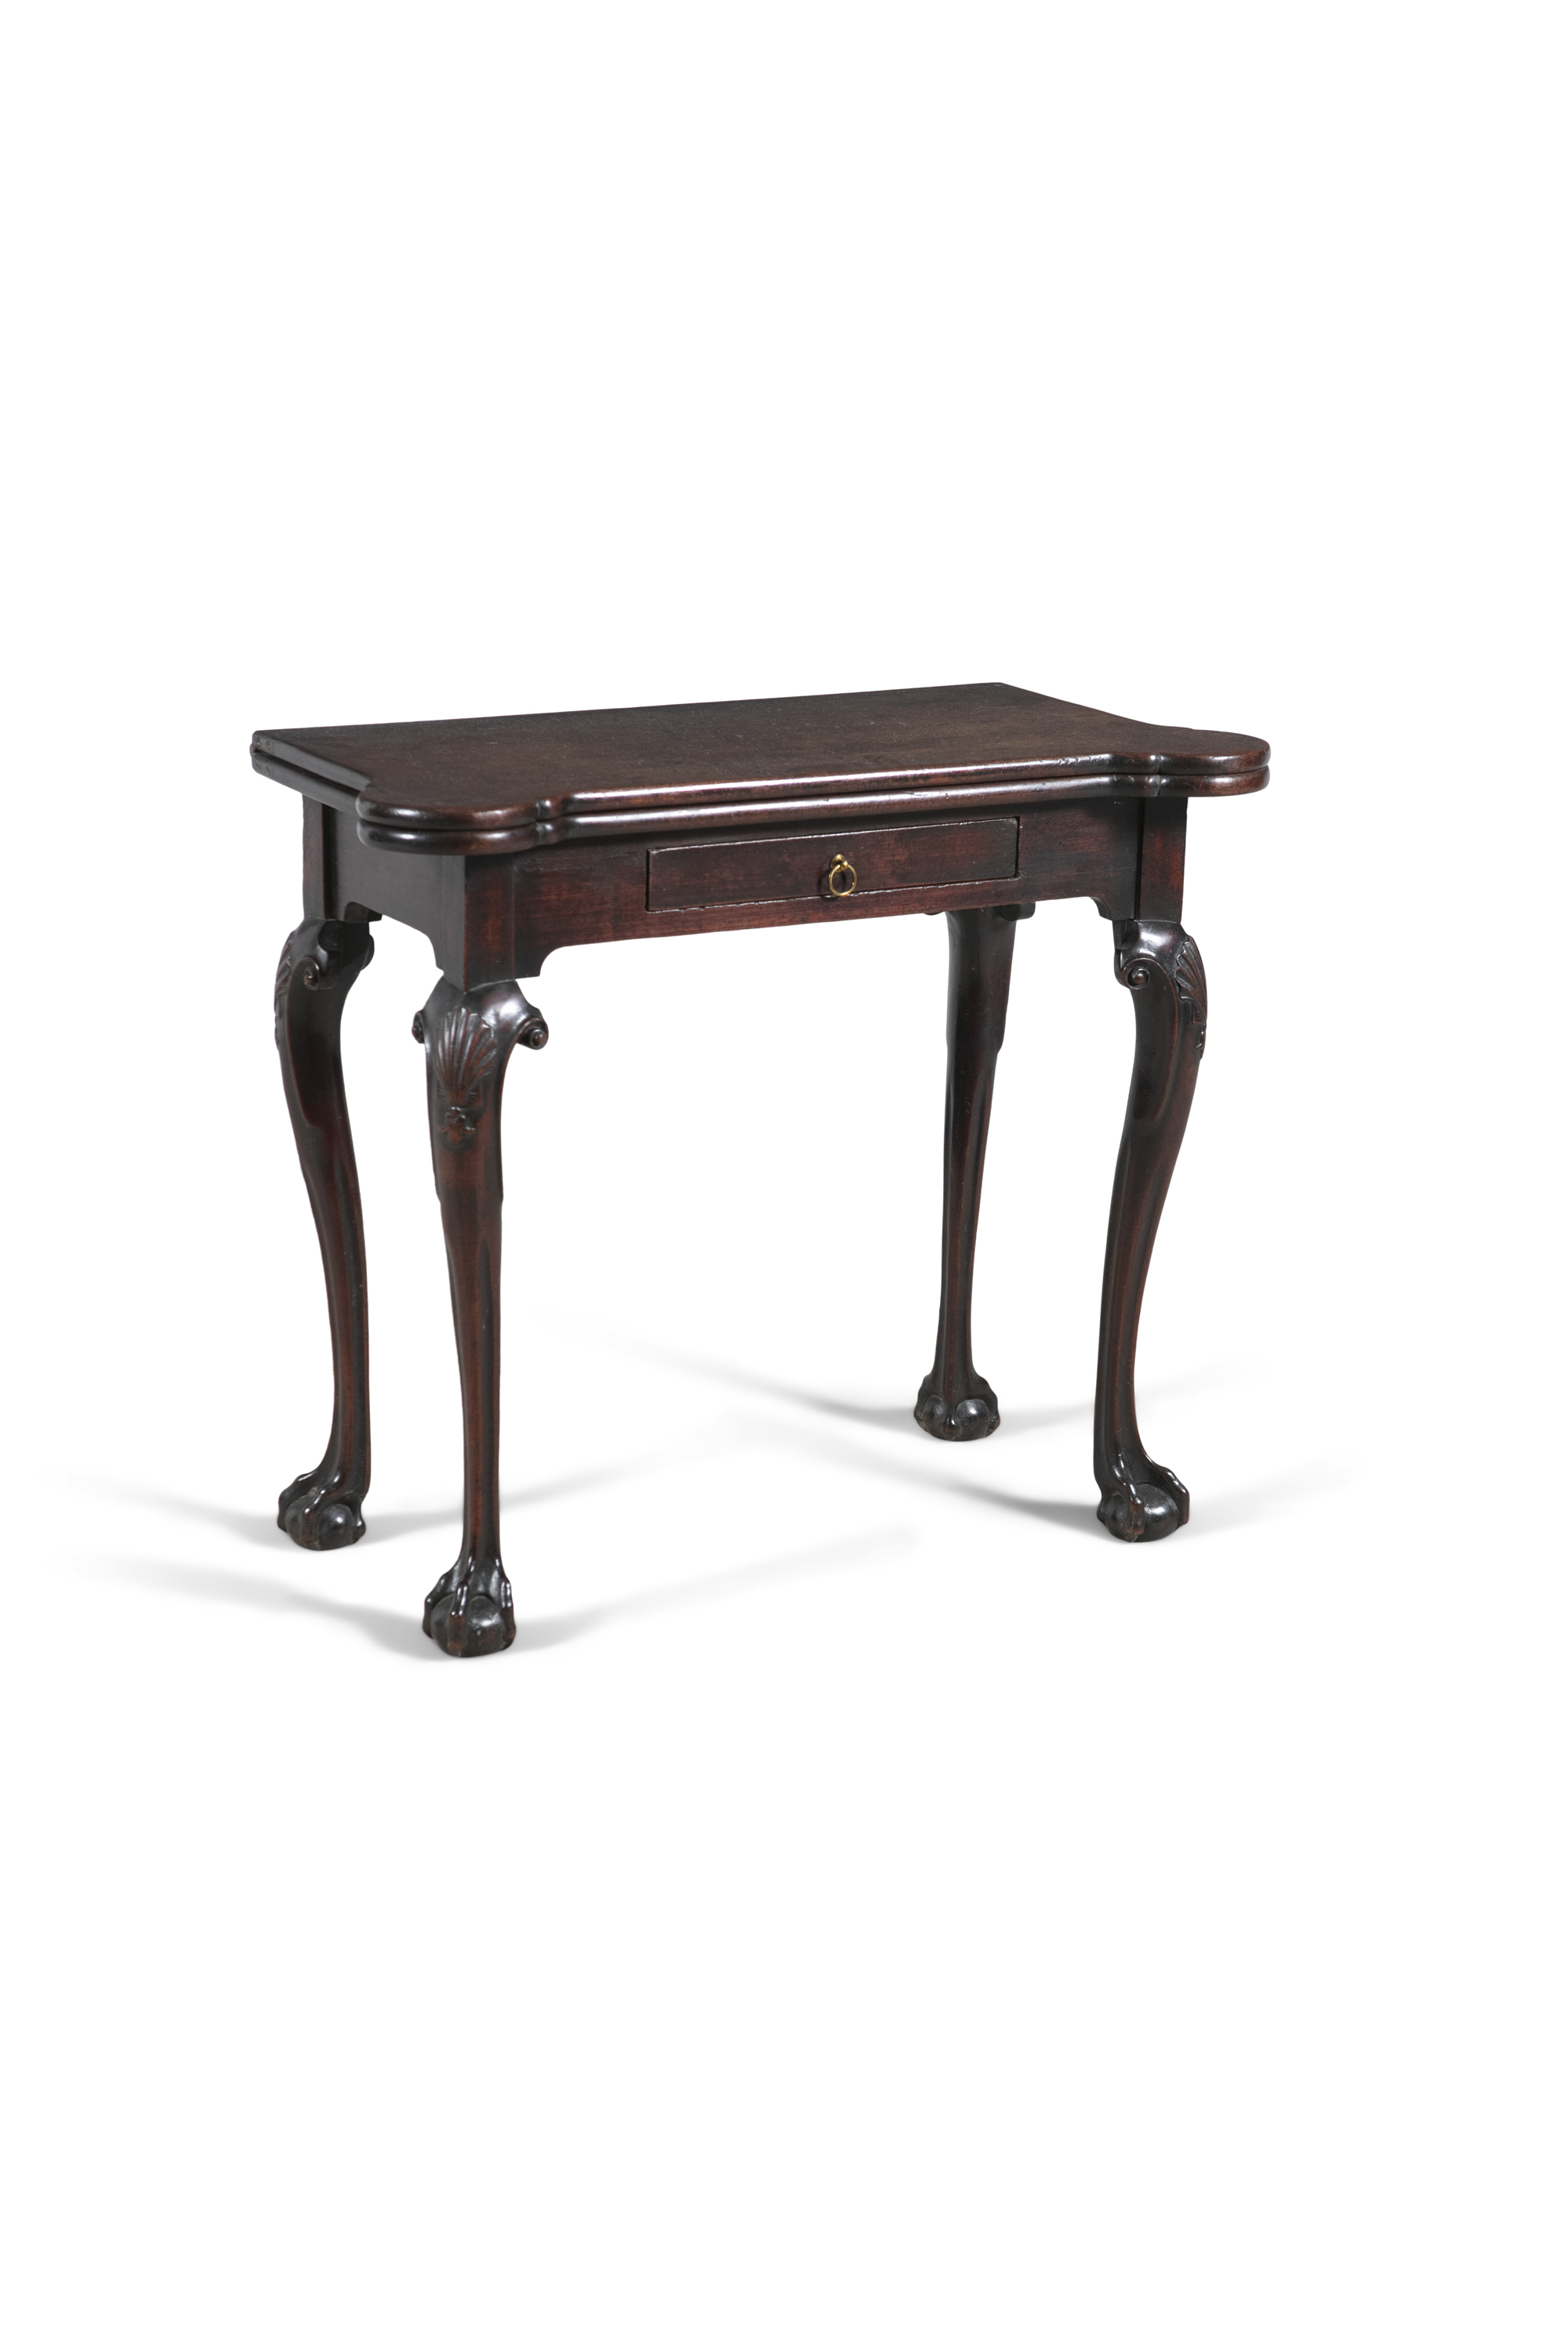 AN IRISH GEORGE III MAHOGANY FOLDING TOP TEA TABLE, with rounded candle stands, with single frieze